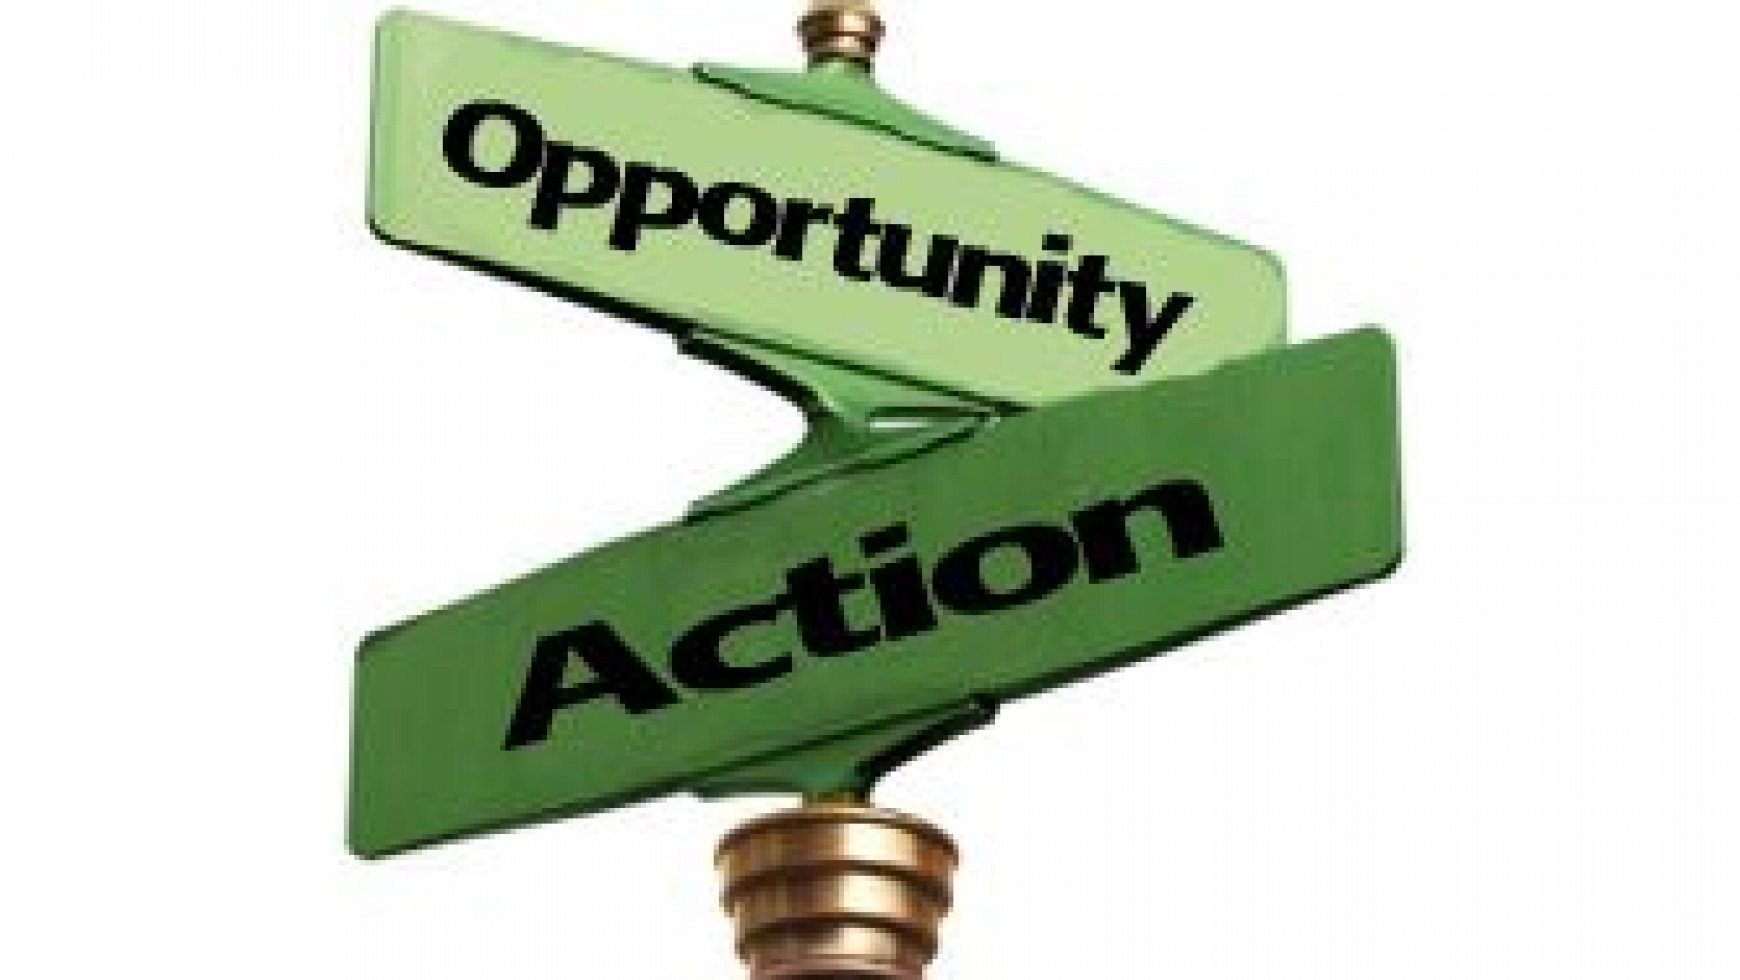 Taking Action When Opportunity Arises